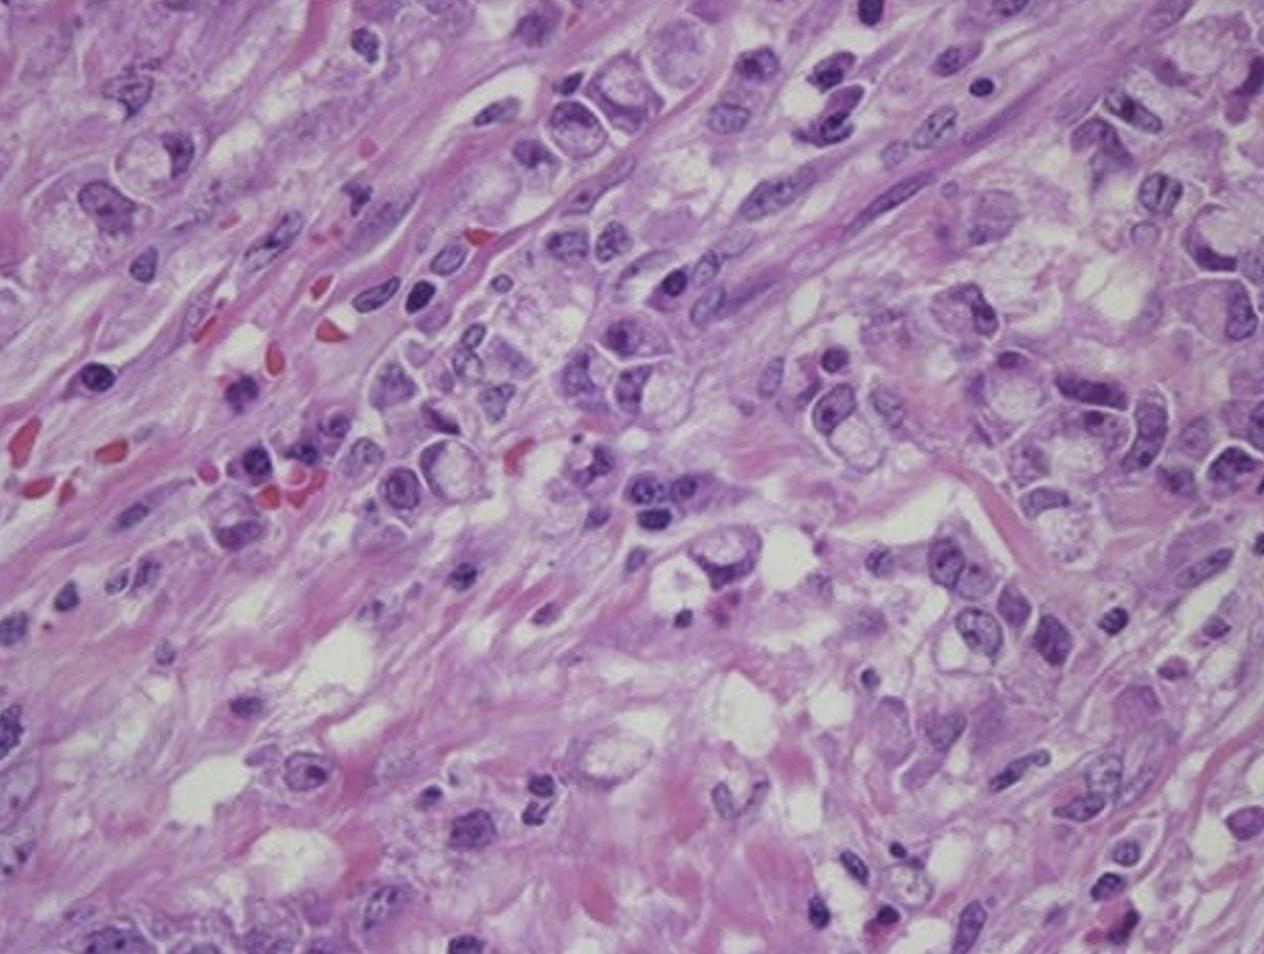 Gastric signet ring cell carcinoma in a 59-year old male patient.